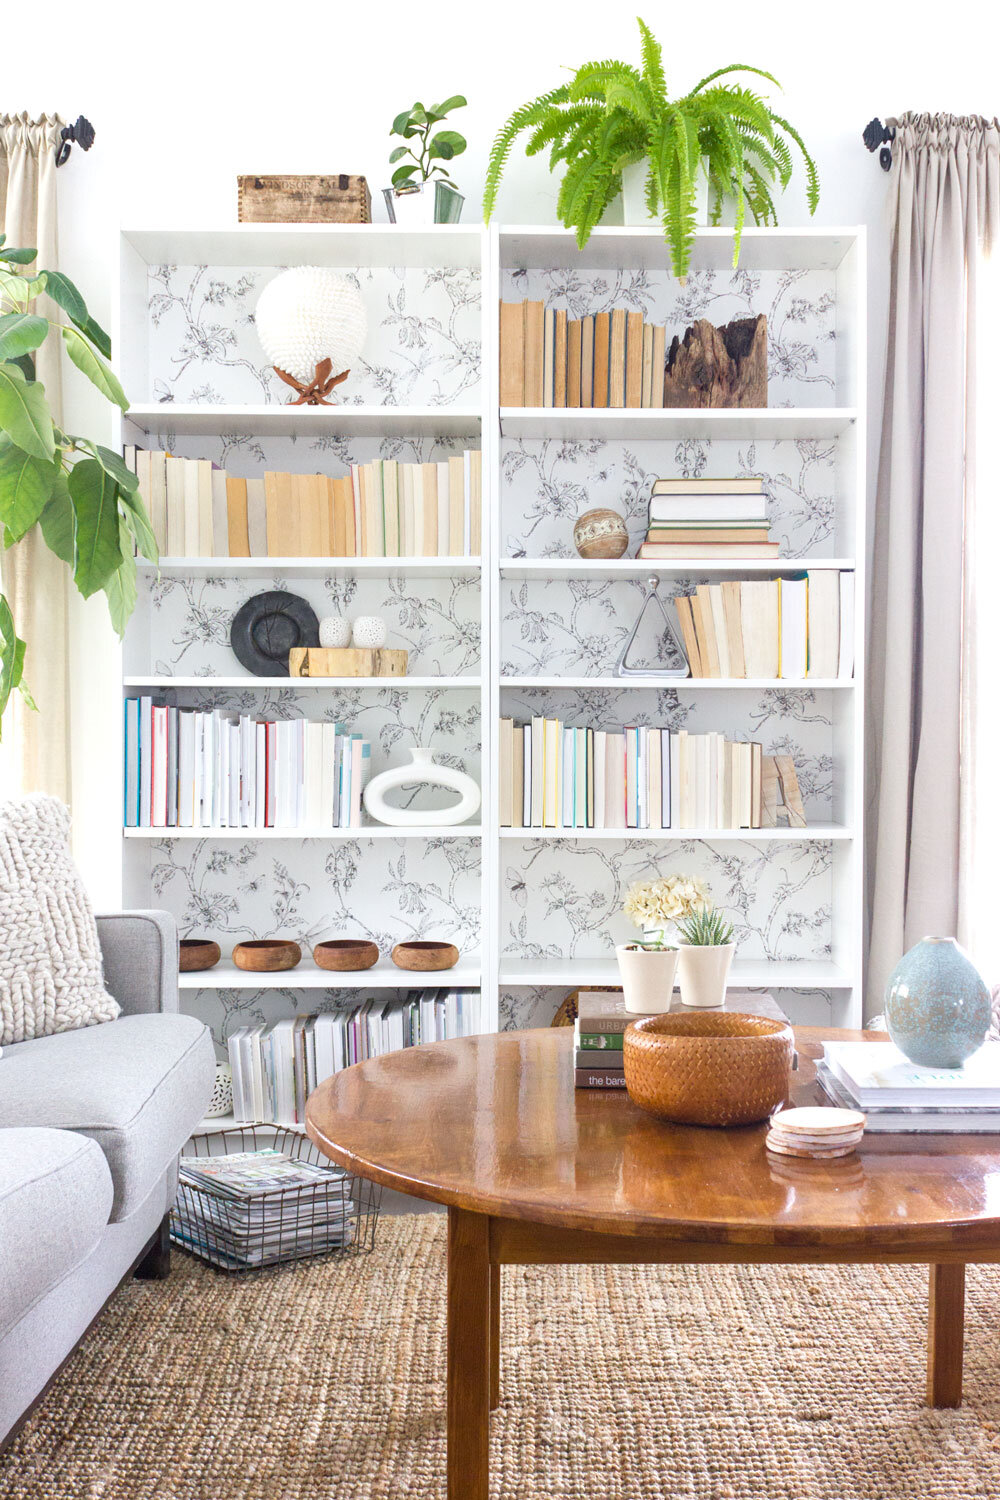 how to style a bookshelf the simple way